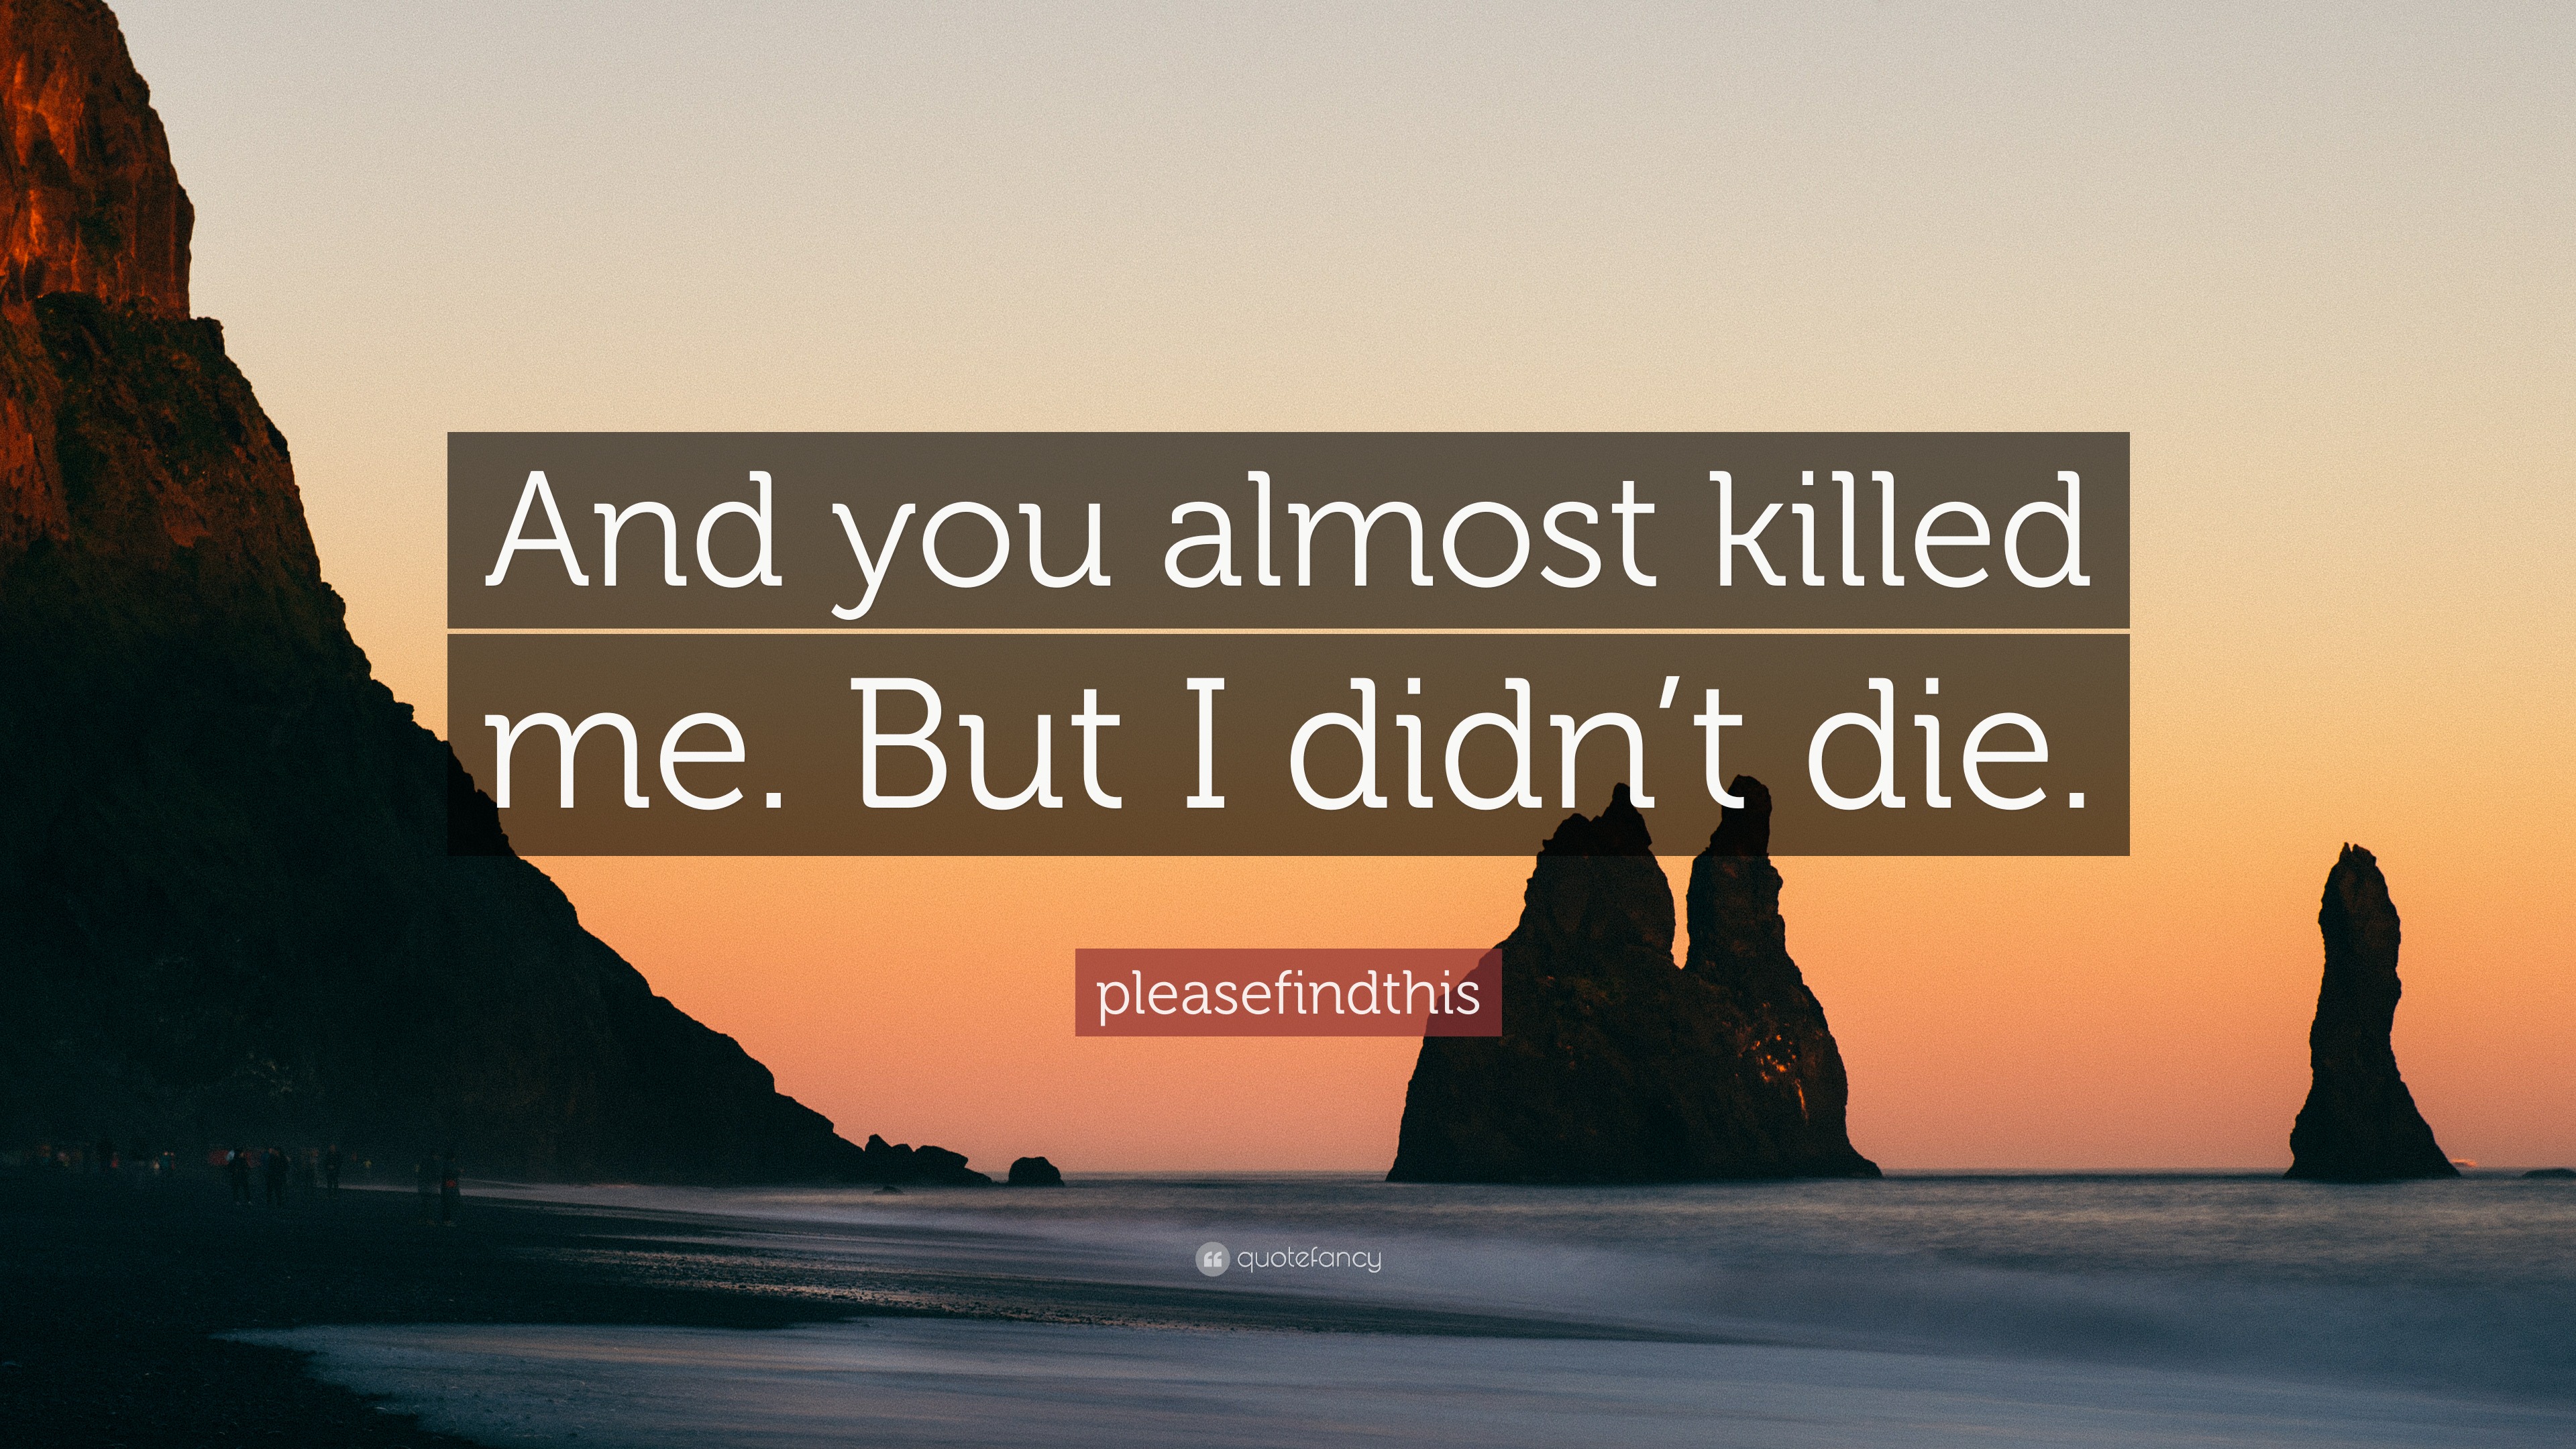 https://quotefancy.com/media/wallpaper/3840x2160/6477458-pleasefindthis-Quote-And-you-almost-killed-me-But-I-didn-t-die.jpg